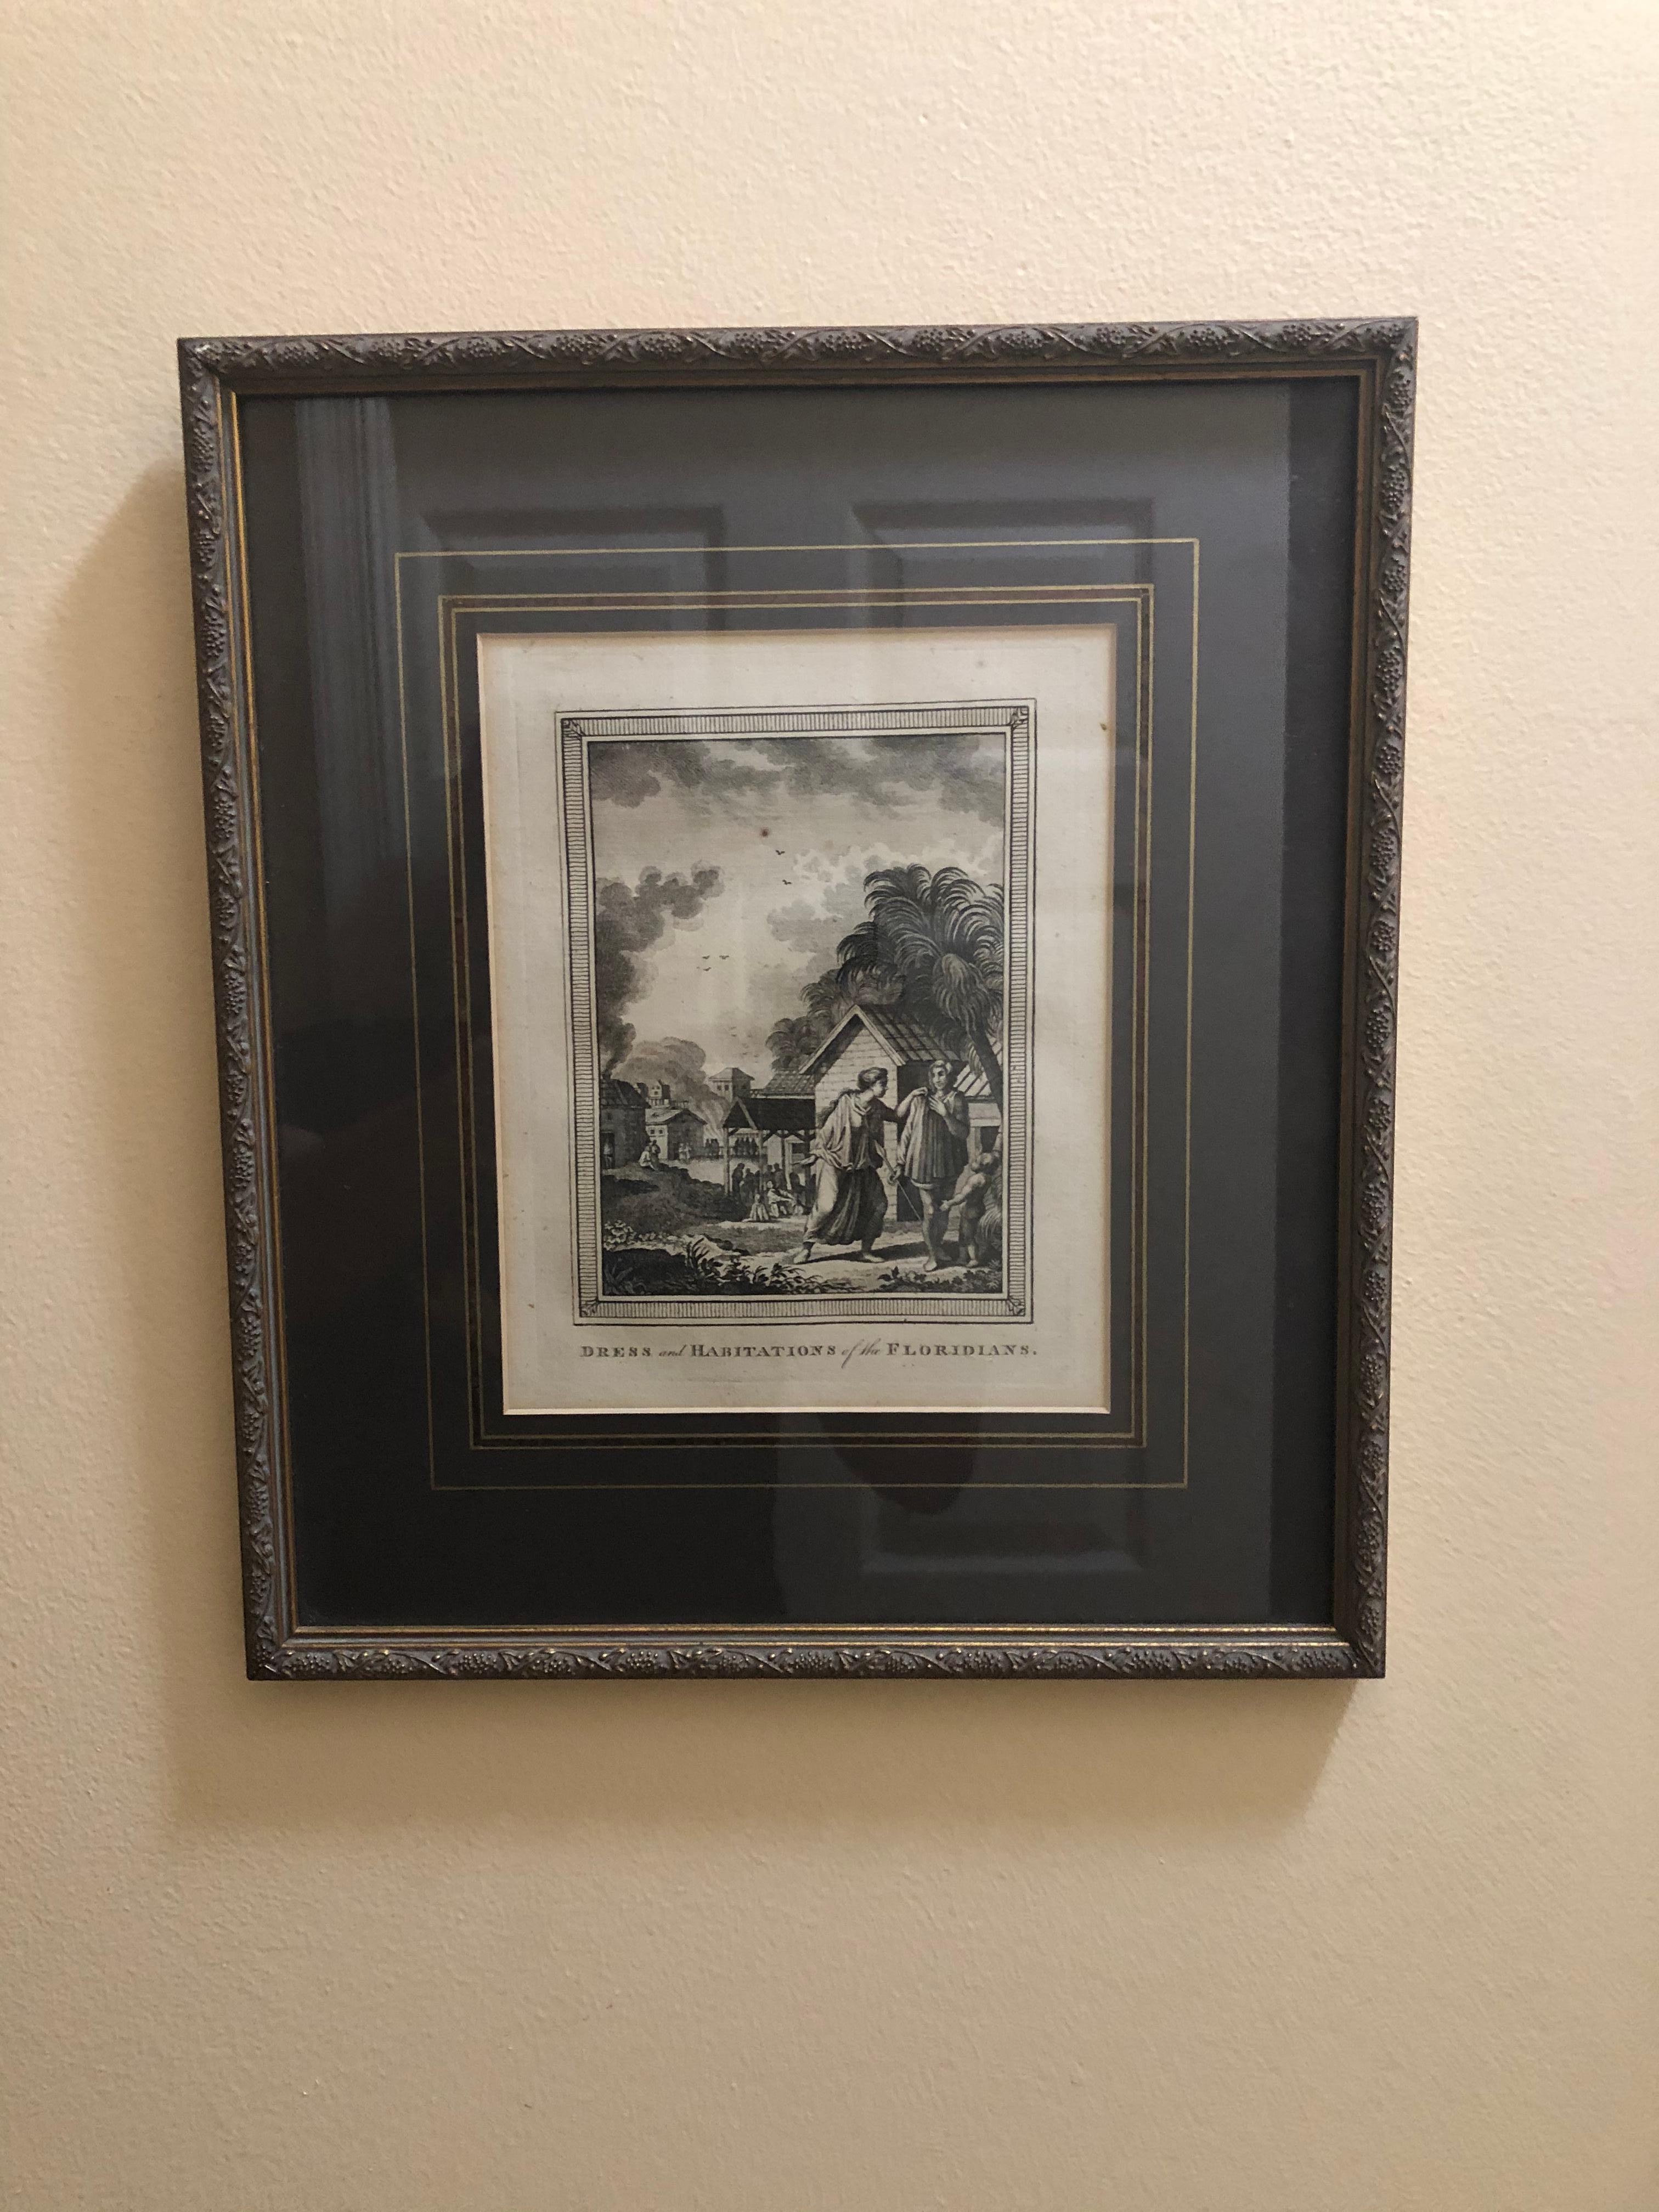 Mid 18th century etching of native Floridians probably used for a book. Very good condition for its age. Etching measures 7 1/2 inches high by 5 3/4 inches wide. The beautiful custom-made frame measures 14 inches high by 12 1/4 inches wide.